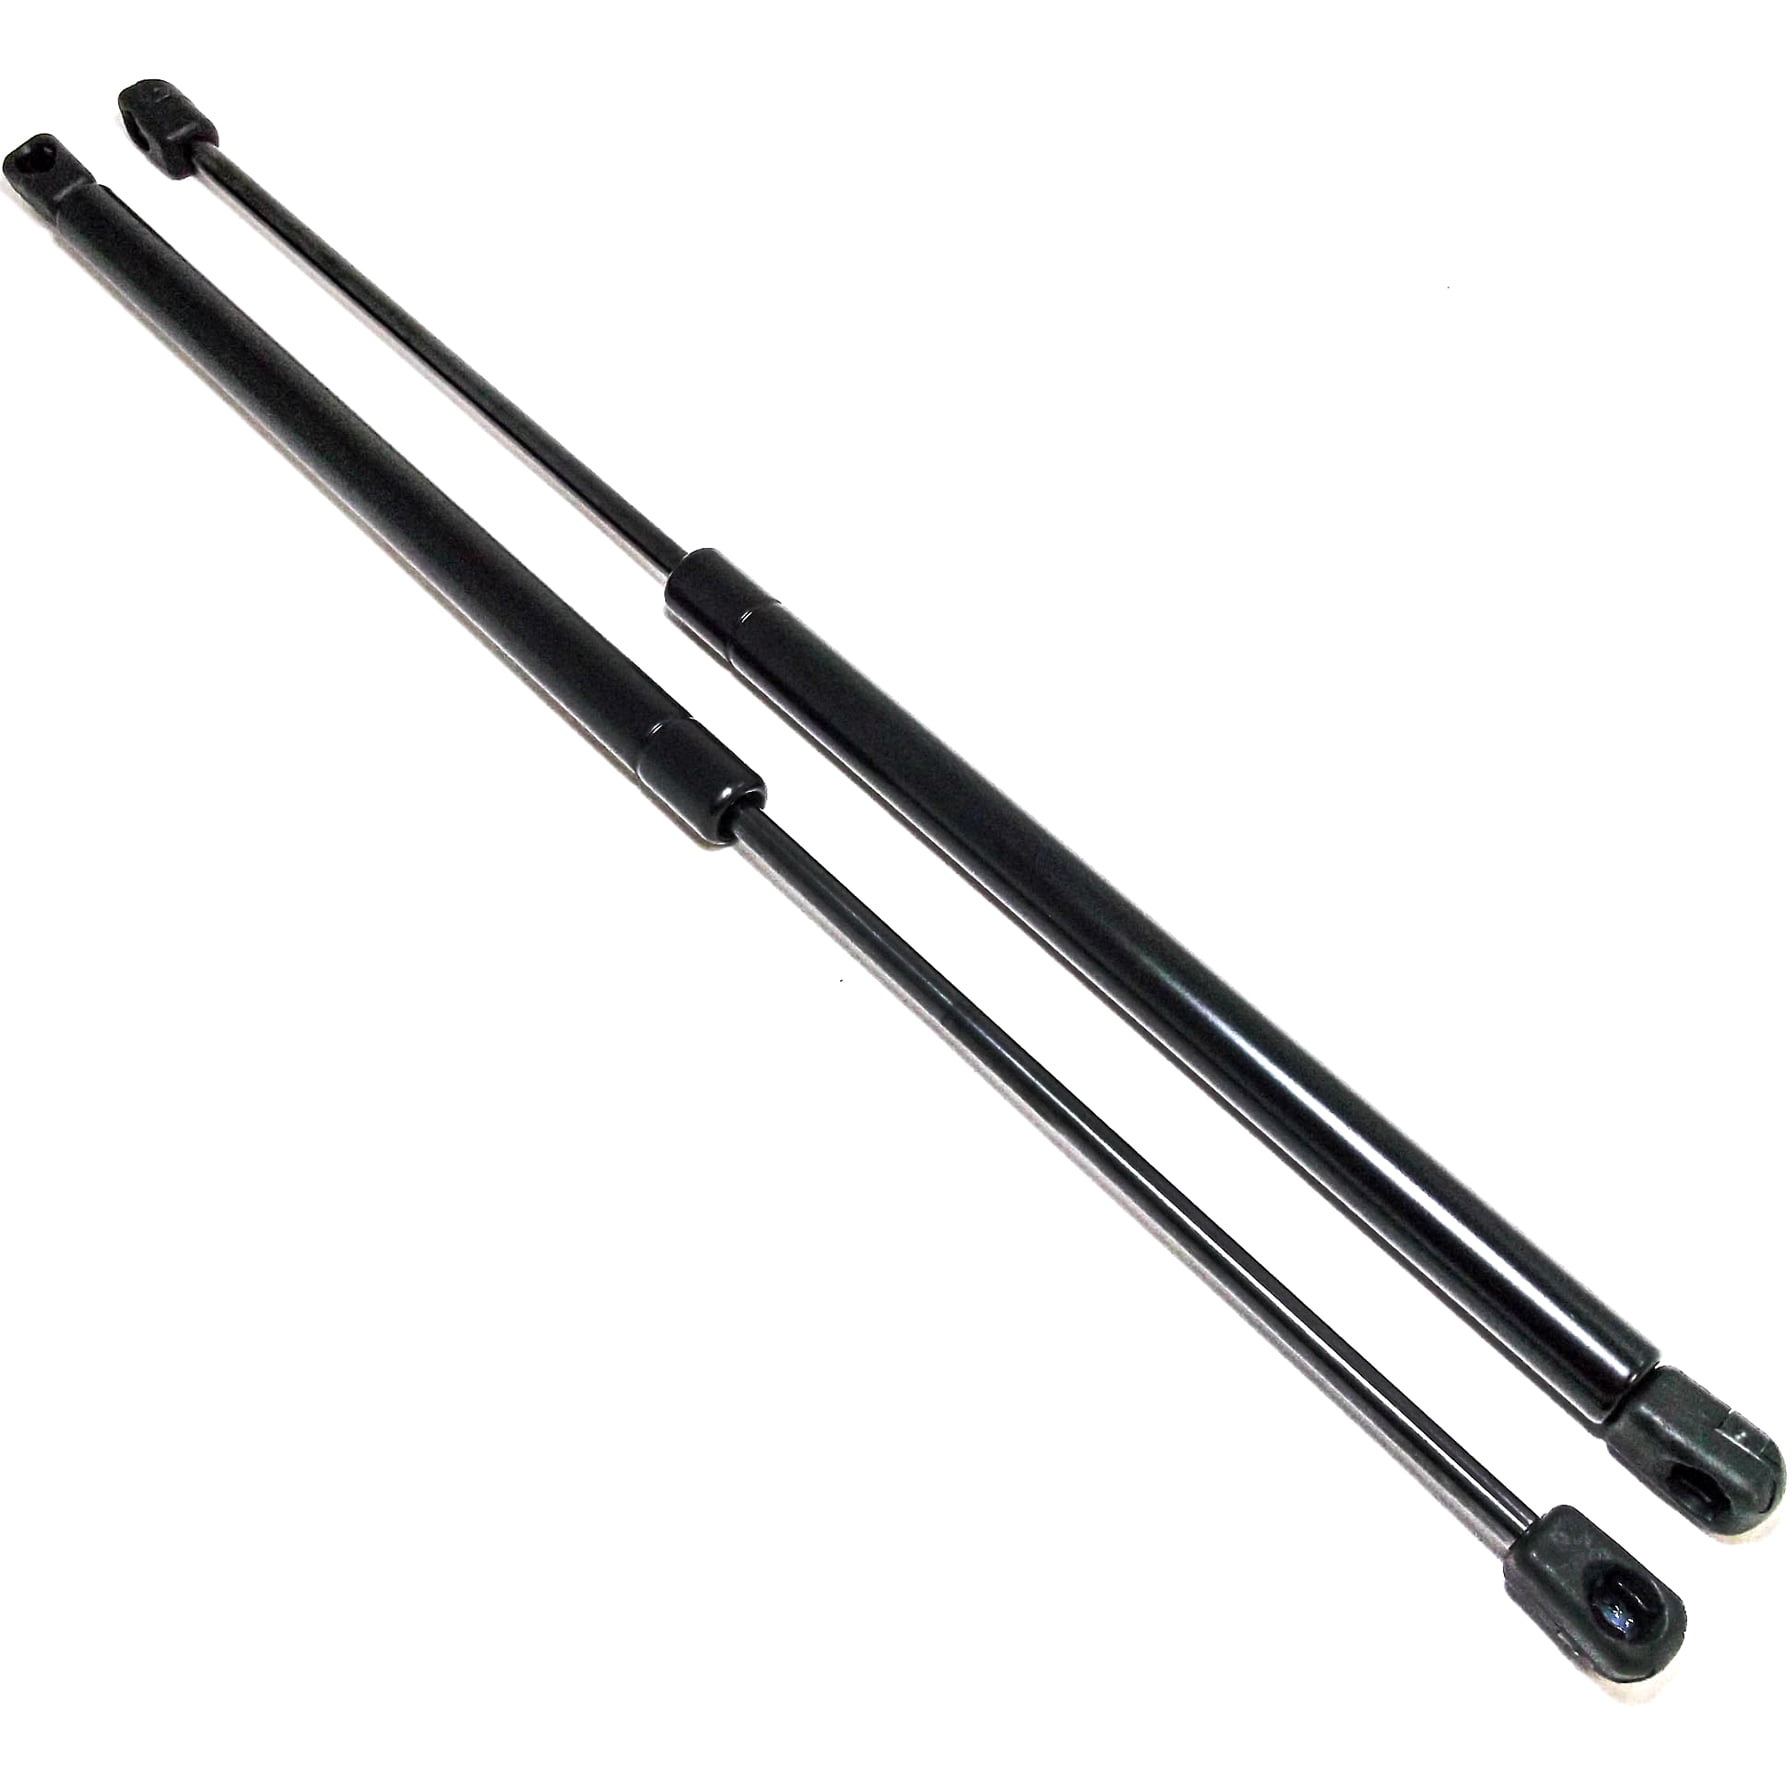 13" 30lb Nitro-Prop Strut Shock Support Rod Spring Lift Arm Replace C16-04464 A 